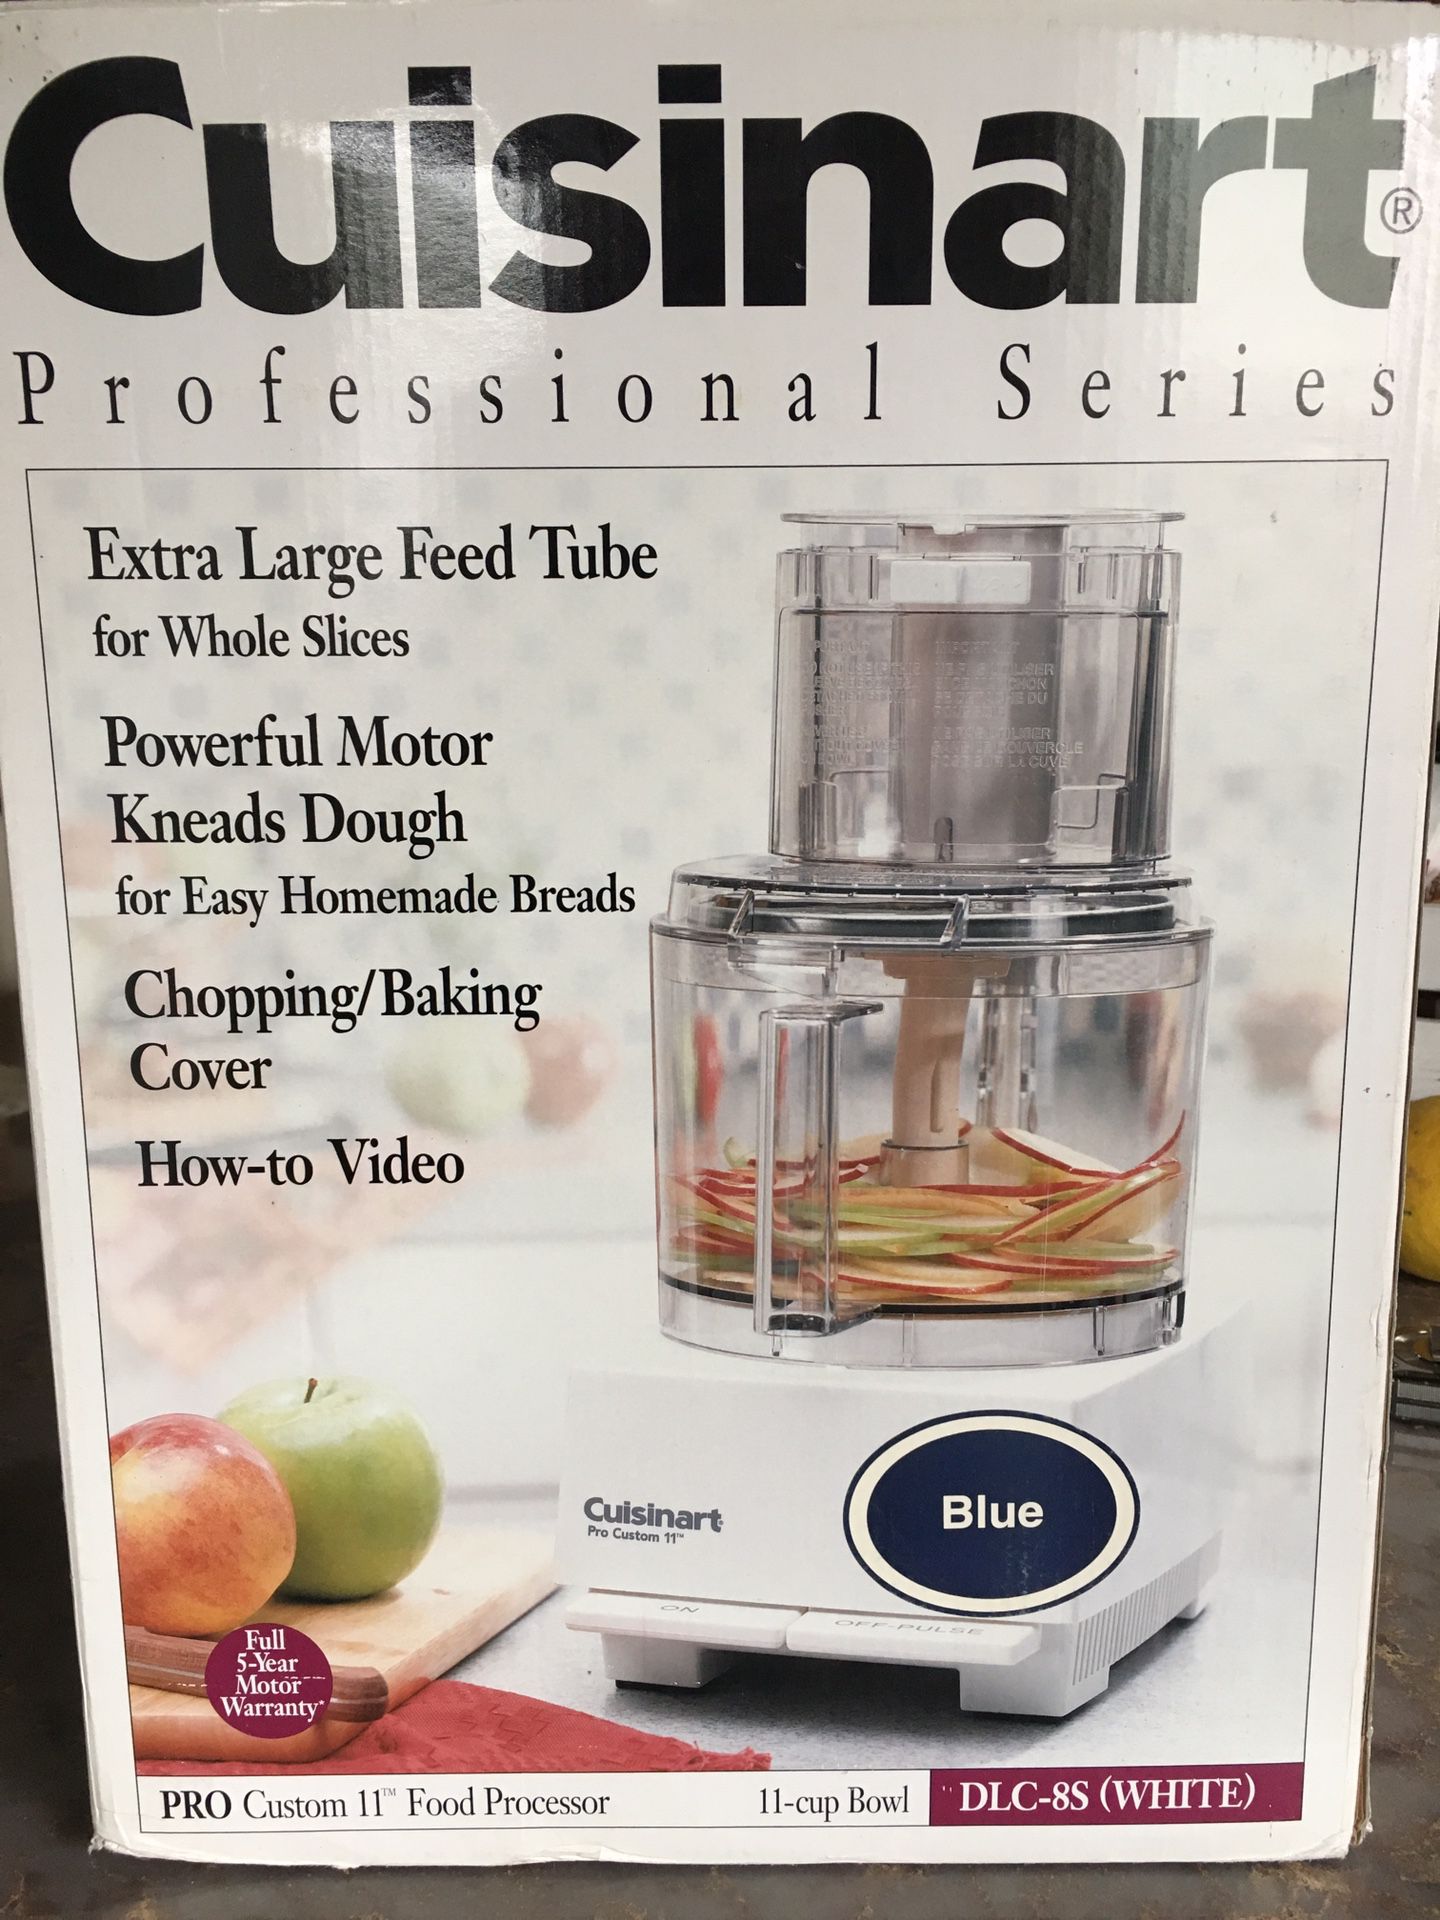 Cuisinart Pro Series Food Processor. 11 cup capacity. Color is blue. Only used a few times. Works beautifully.